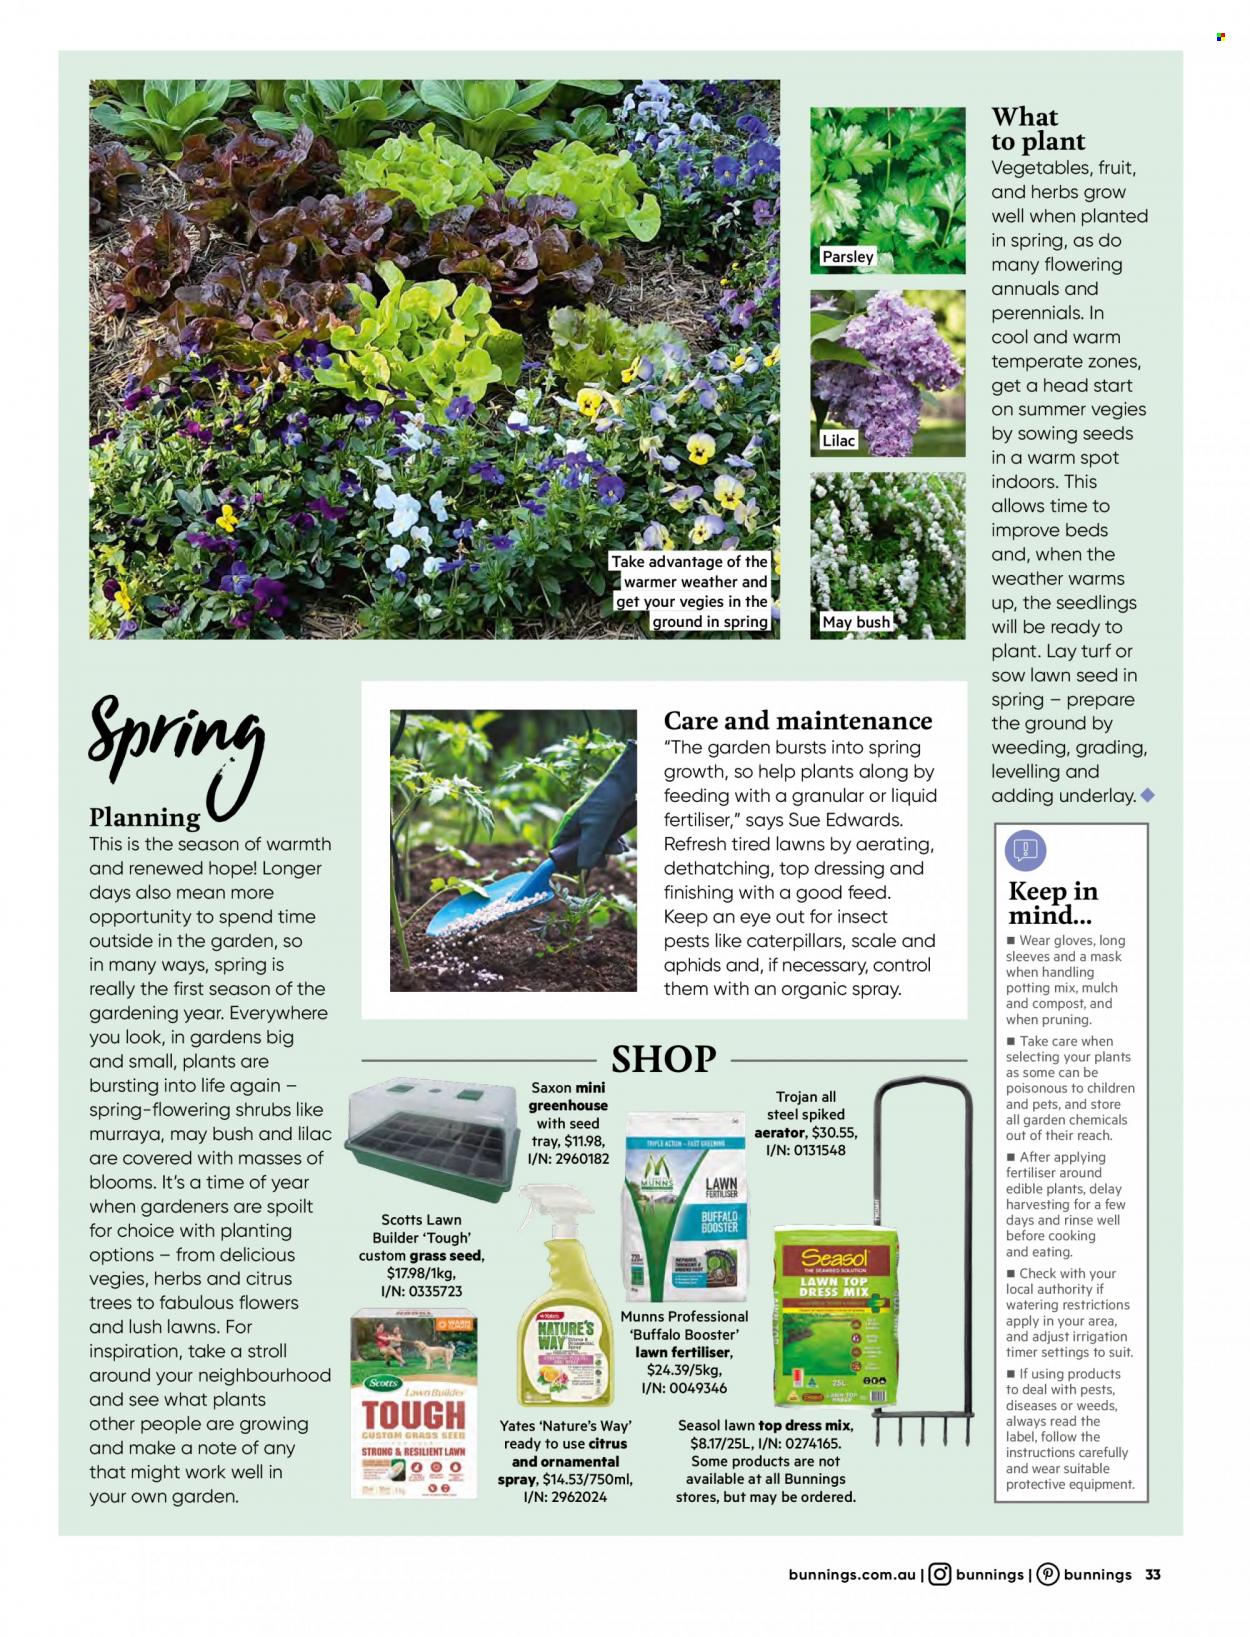 thumbnail - Bunnings Warehouse Catalogue - Sales products - bed, scale, tray, timer, greenhouse, herbs, Yates, potting mix, grass seed, garden mulch, compost. Page 33.